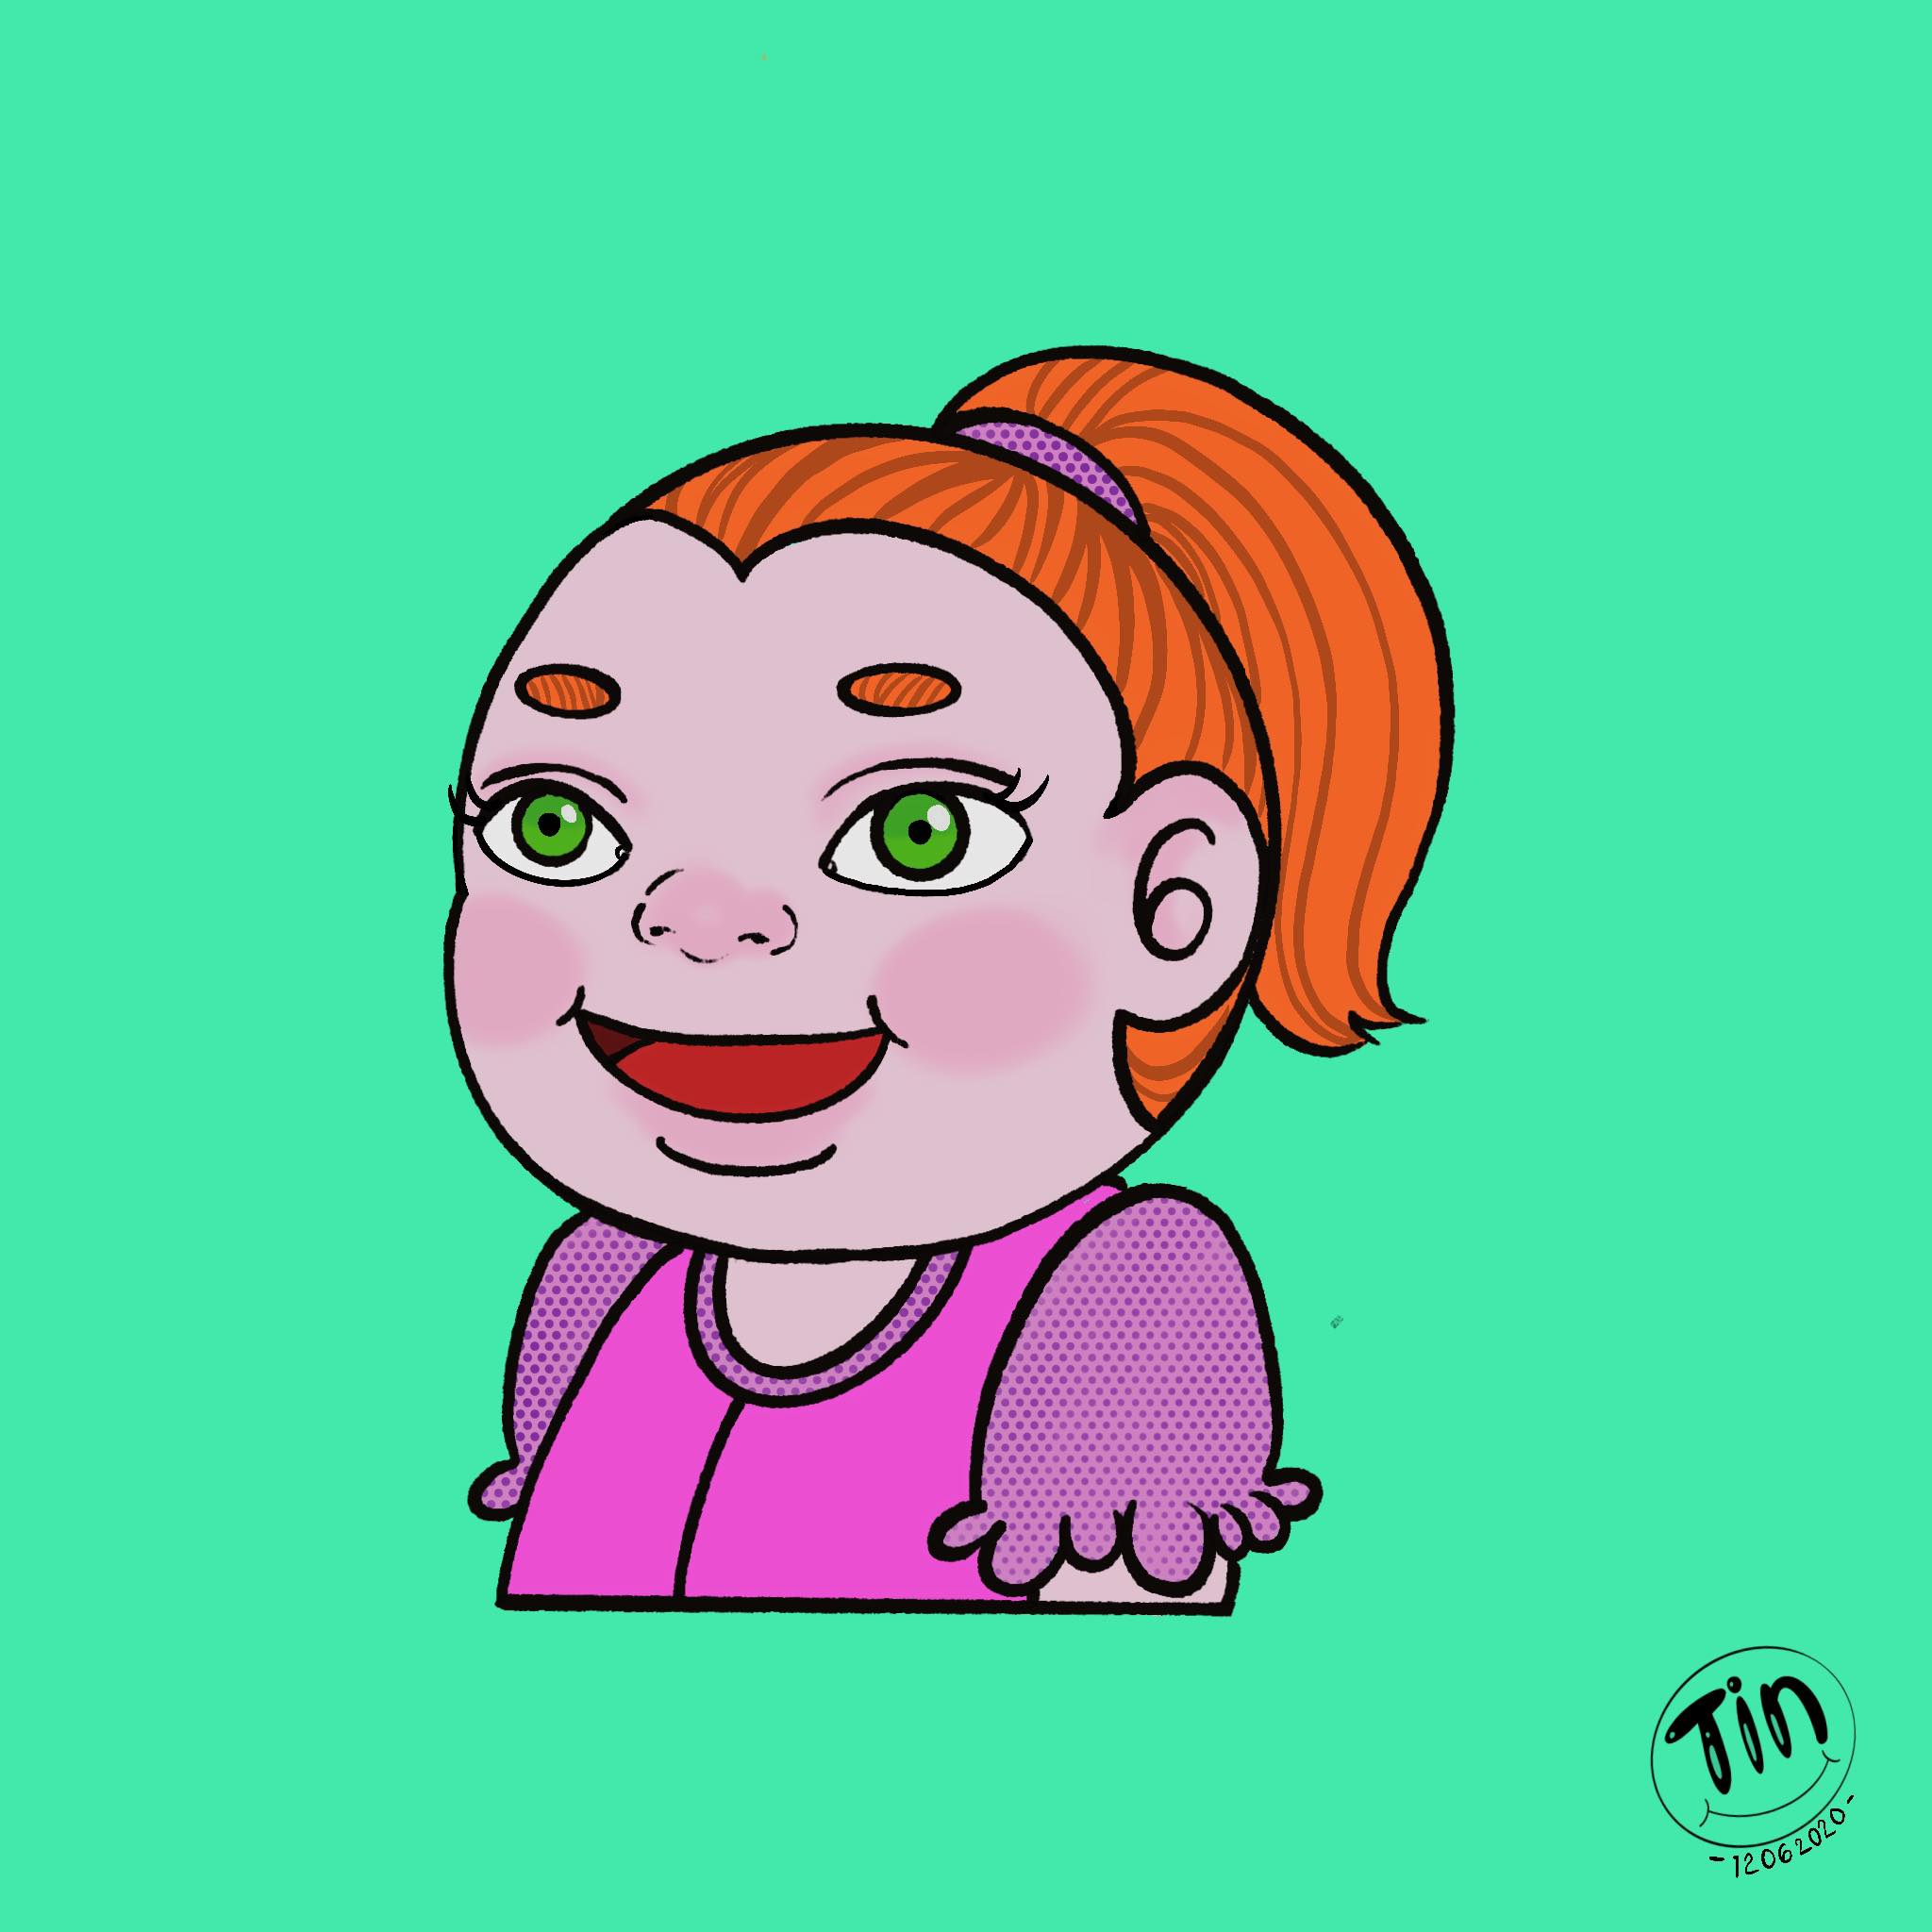 Draw cartoons using procreate by Kristinedeasis | Fiverr